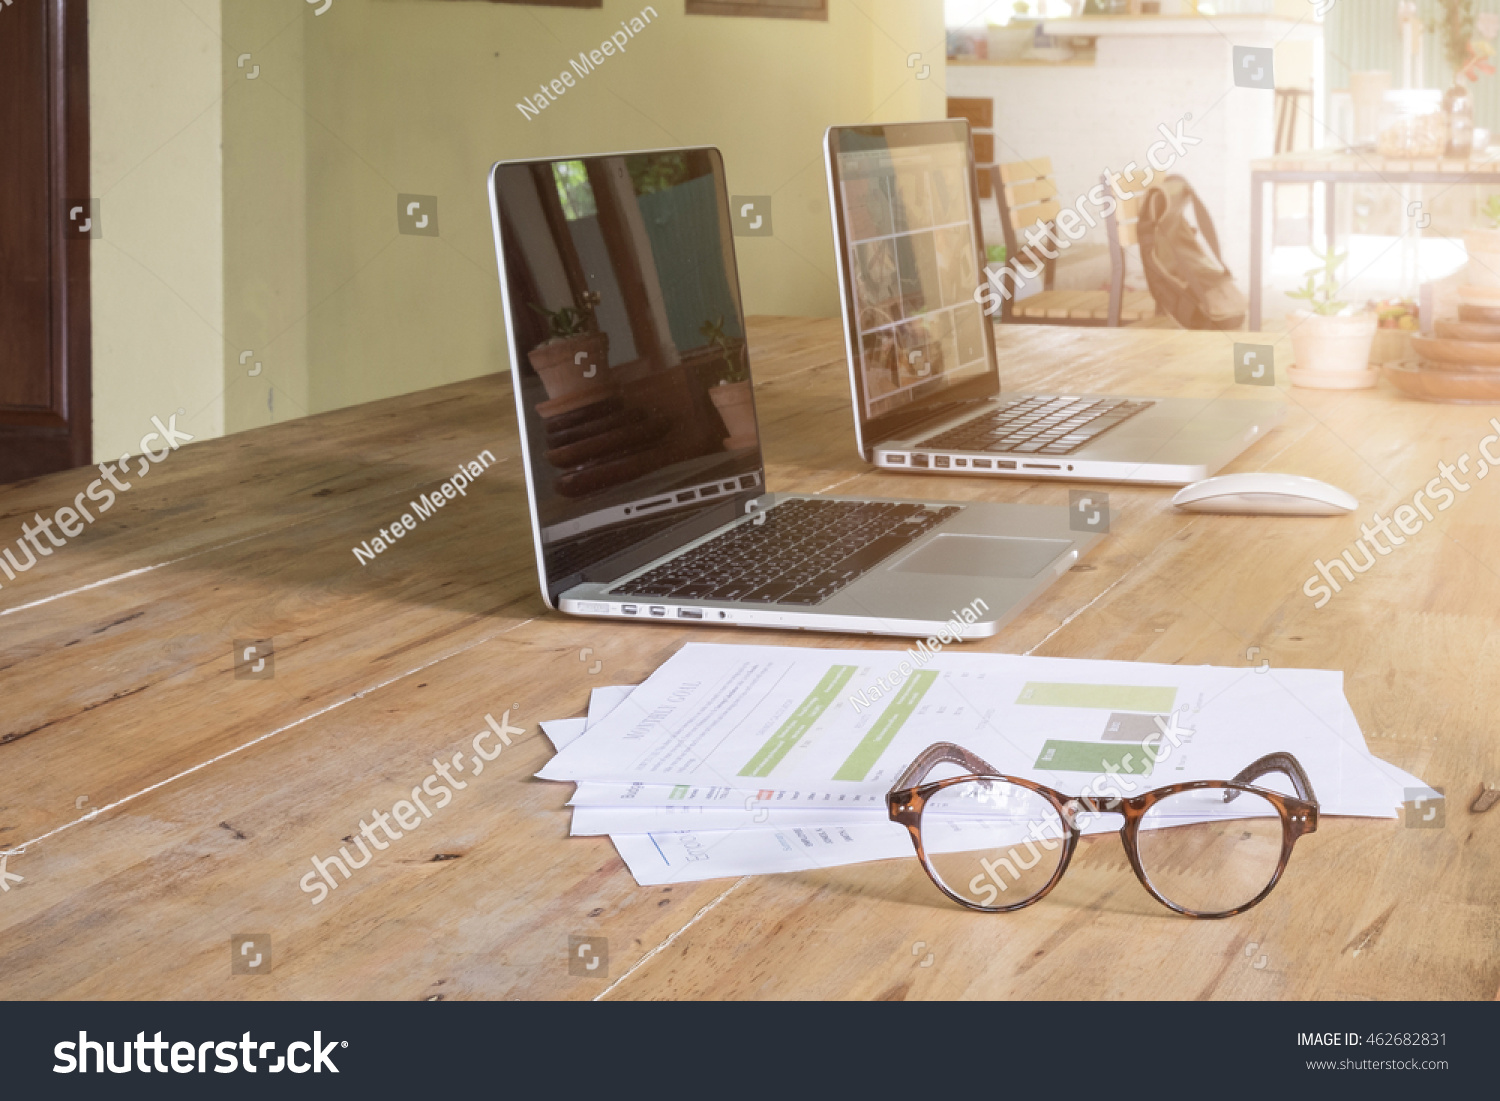 Office workplace with laptop with document statistics and glasses wood table #462682831